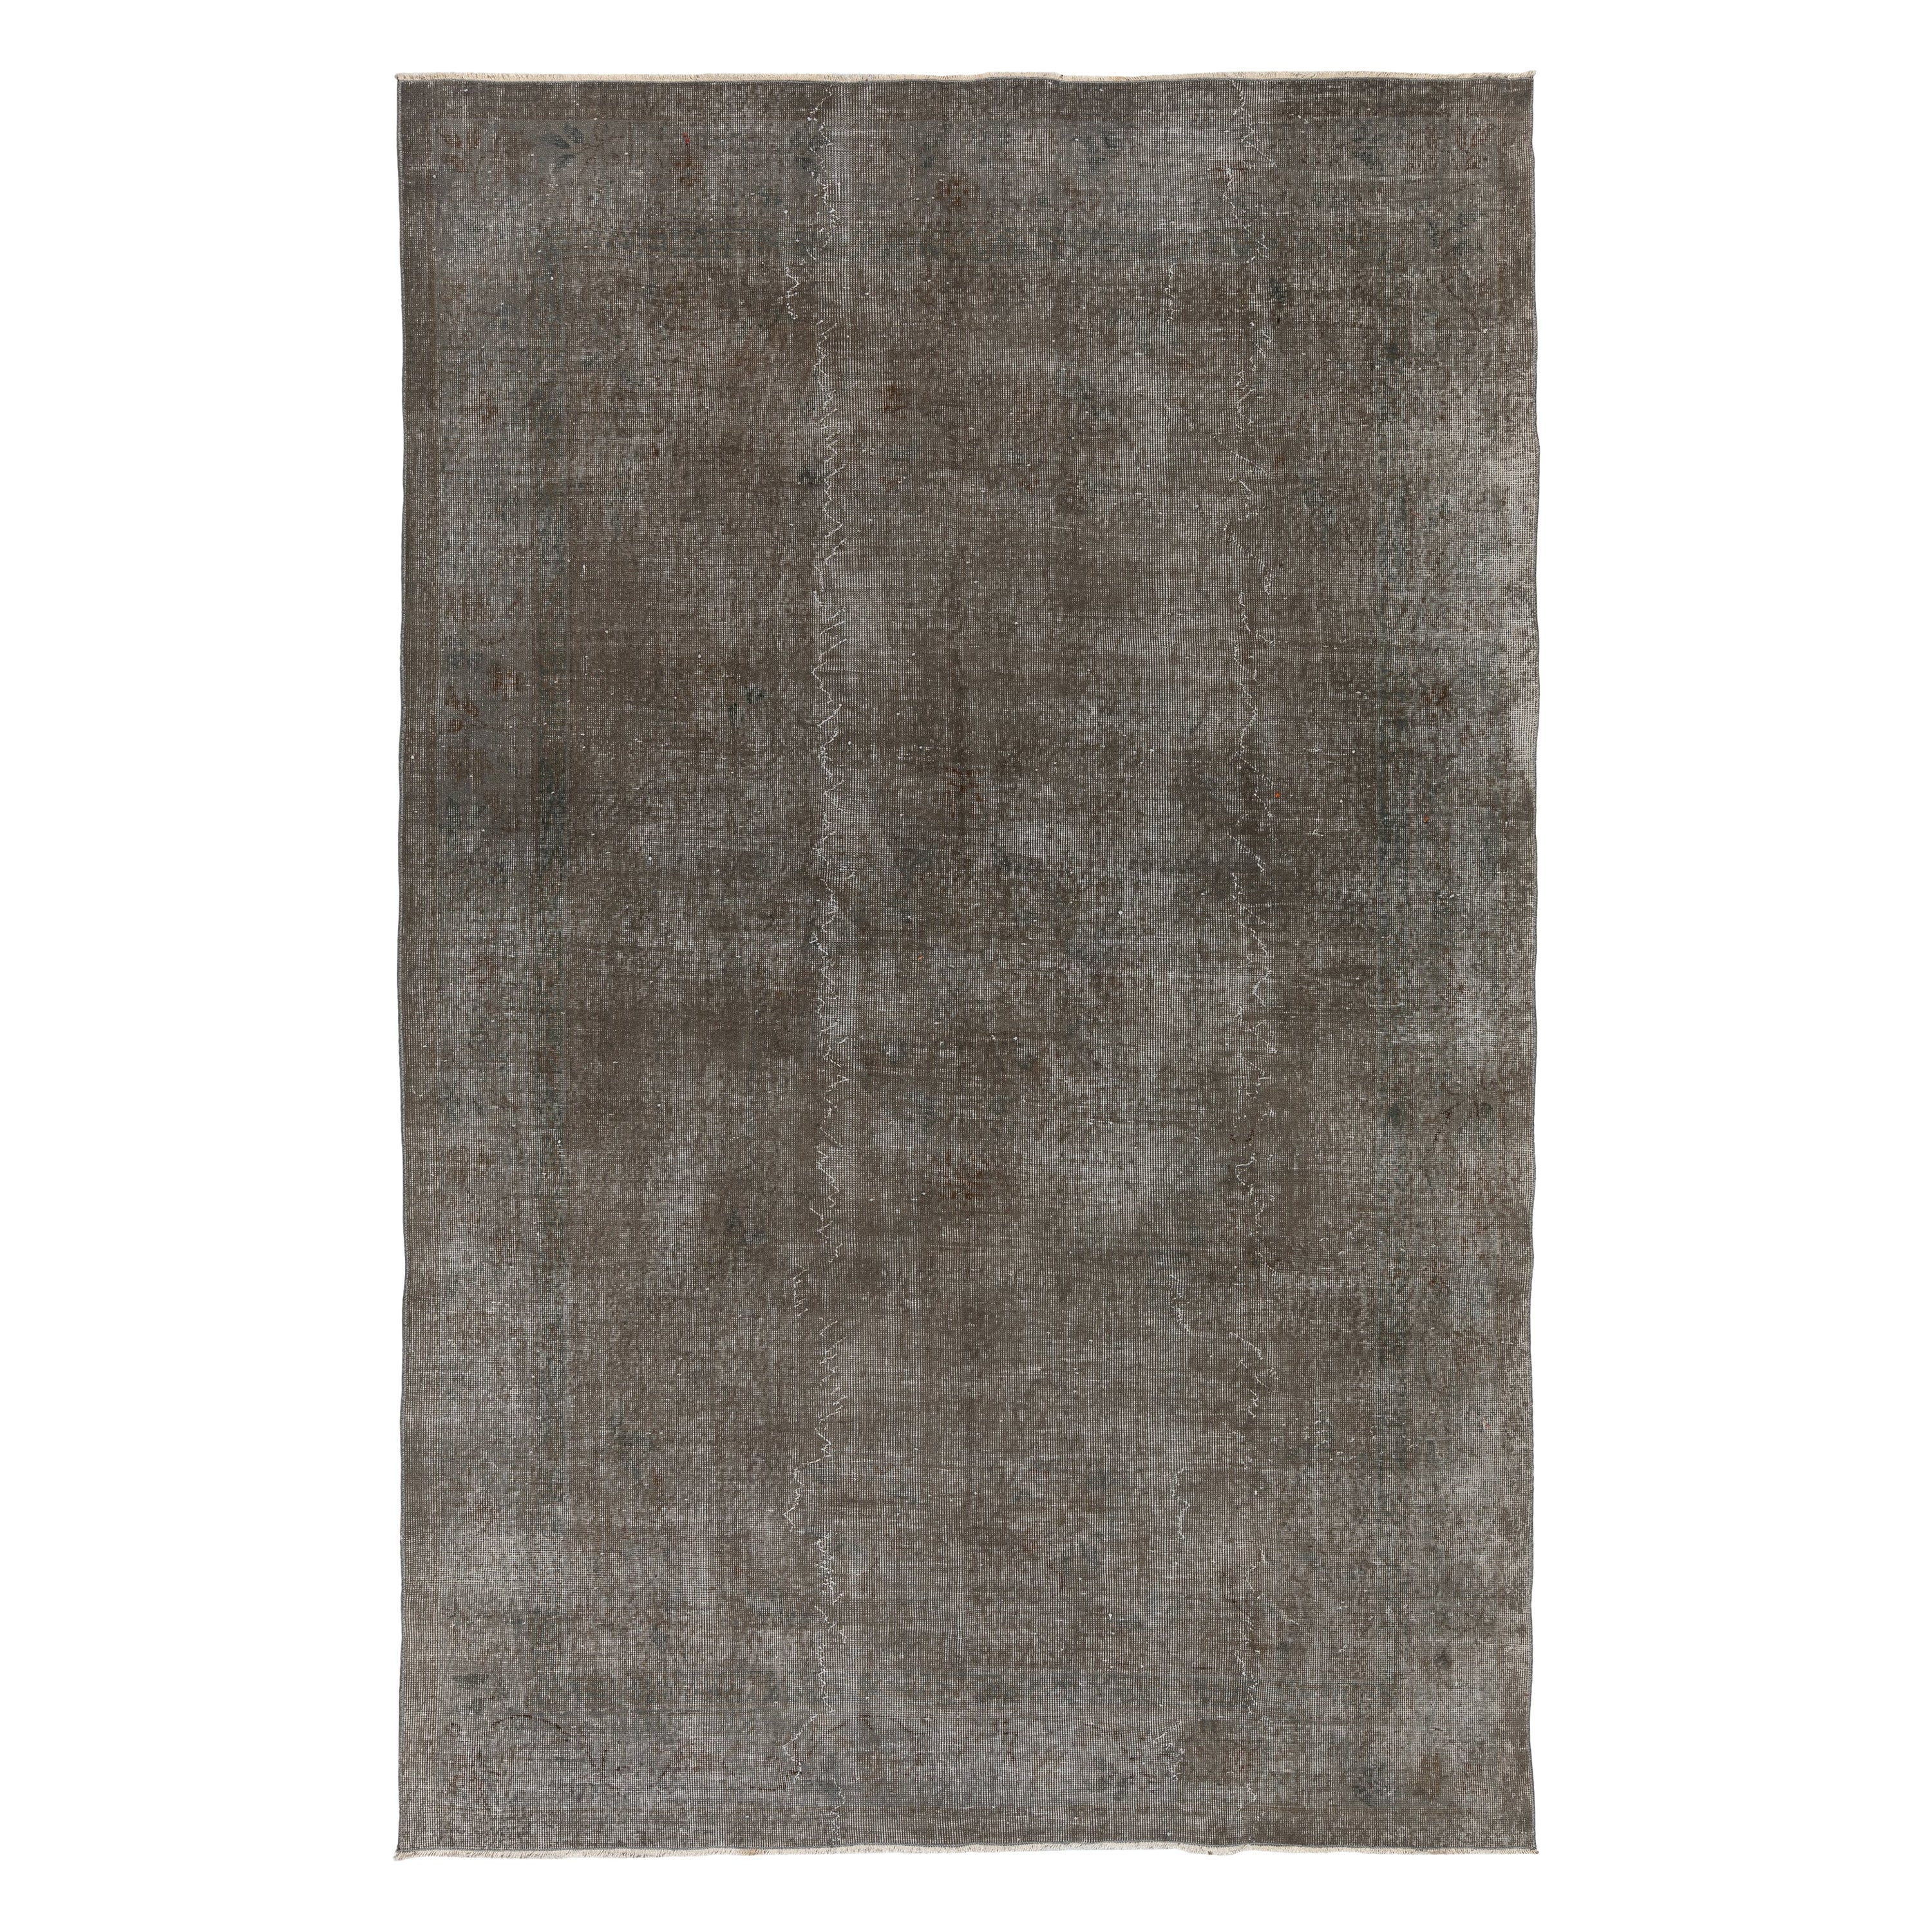 6.7x9.9 Ft Vintage Wool Area Rug in Gray for Living Room, Hand Knotted in Turkey